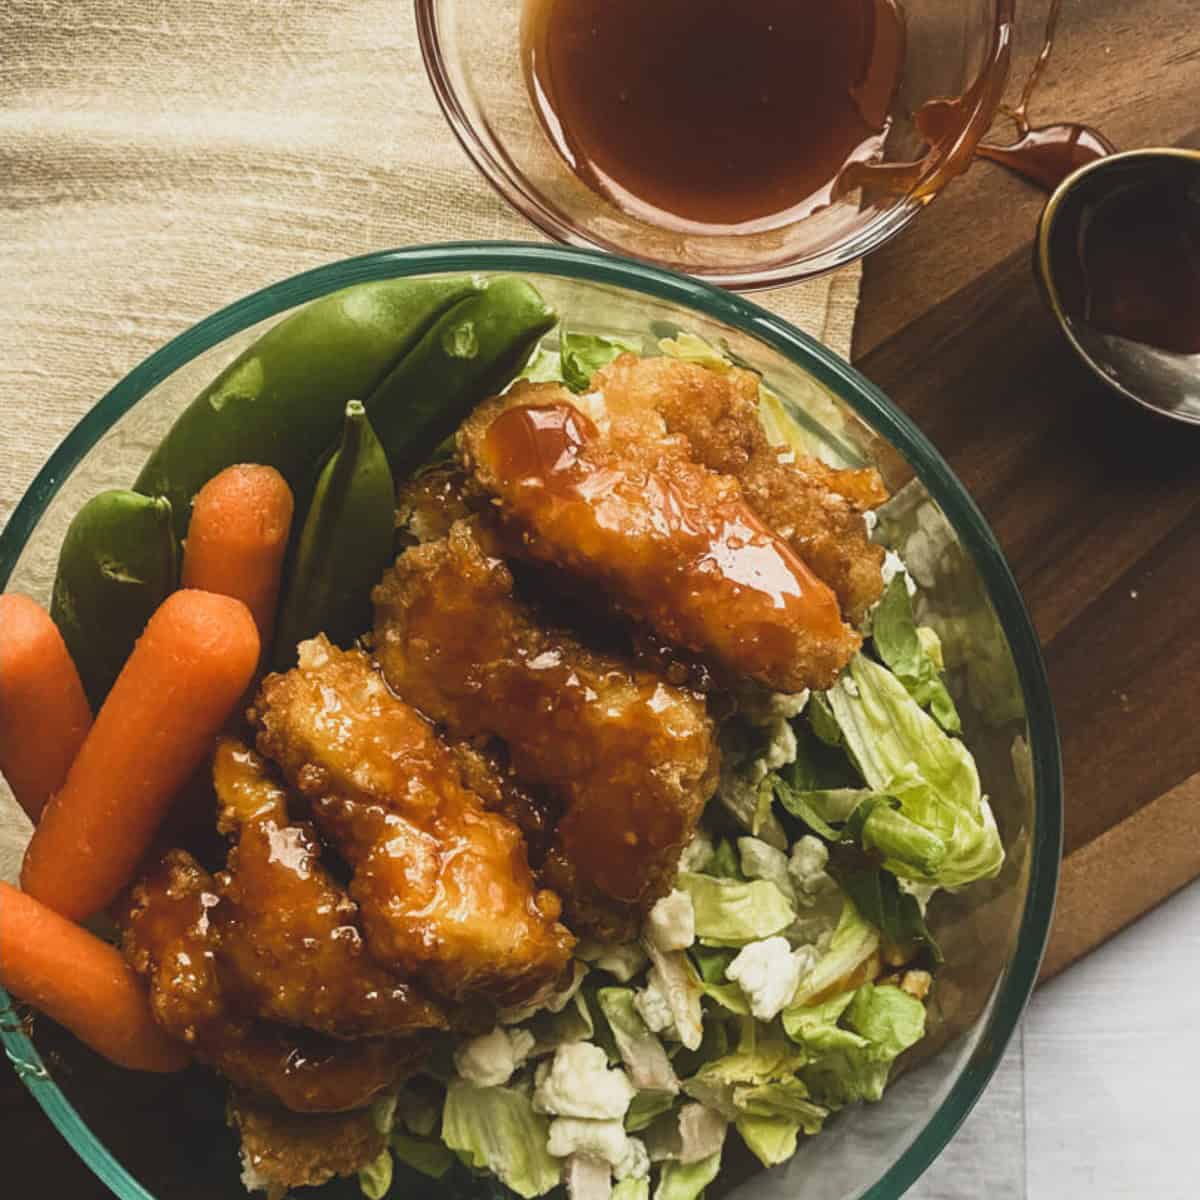 A close-up of a bowl of Wingers sticky fingers recipe with a side of shredded carrots and lettuce on a wooden table. The wings are coated in a red sauce and appear saucy and glistening.